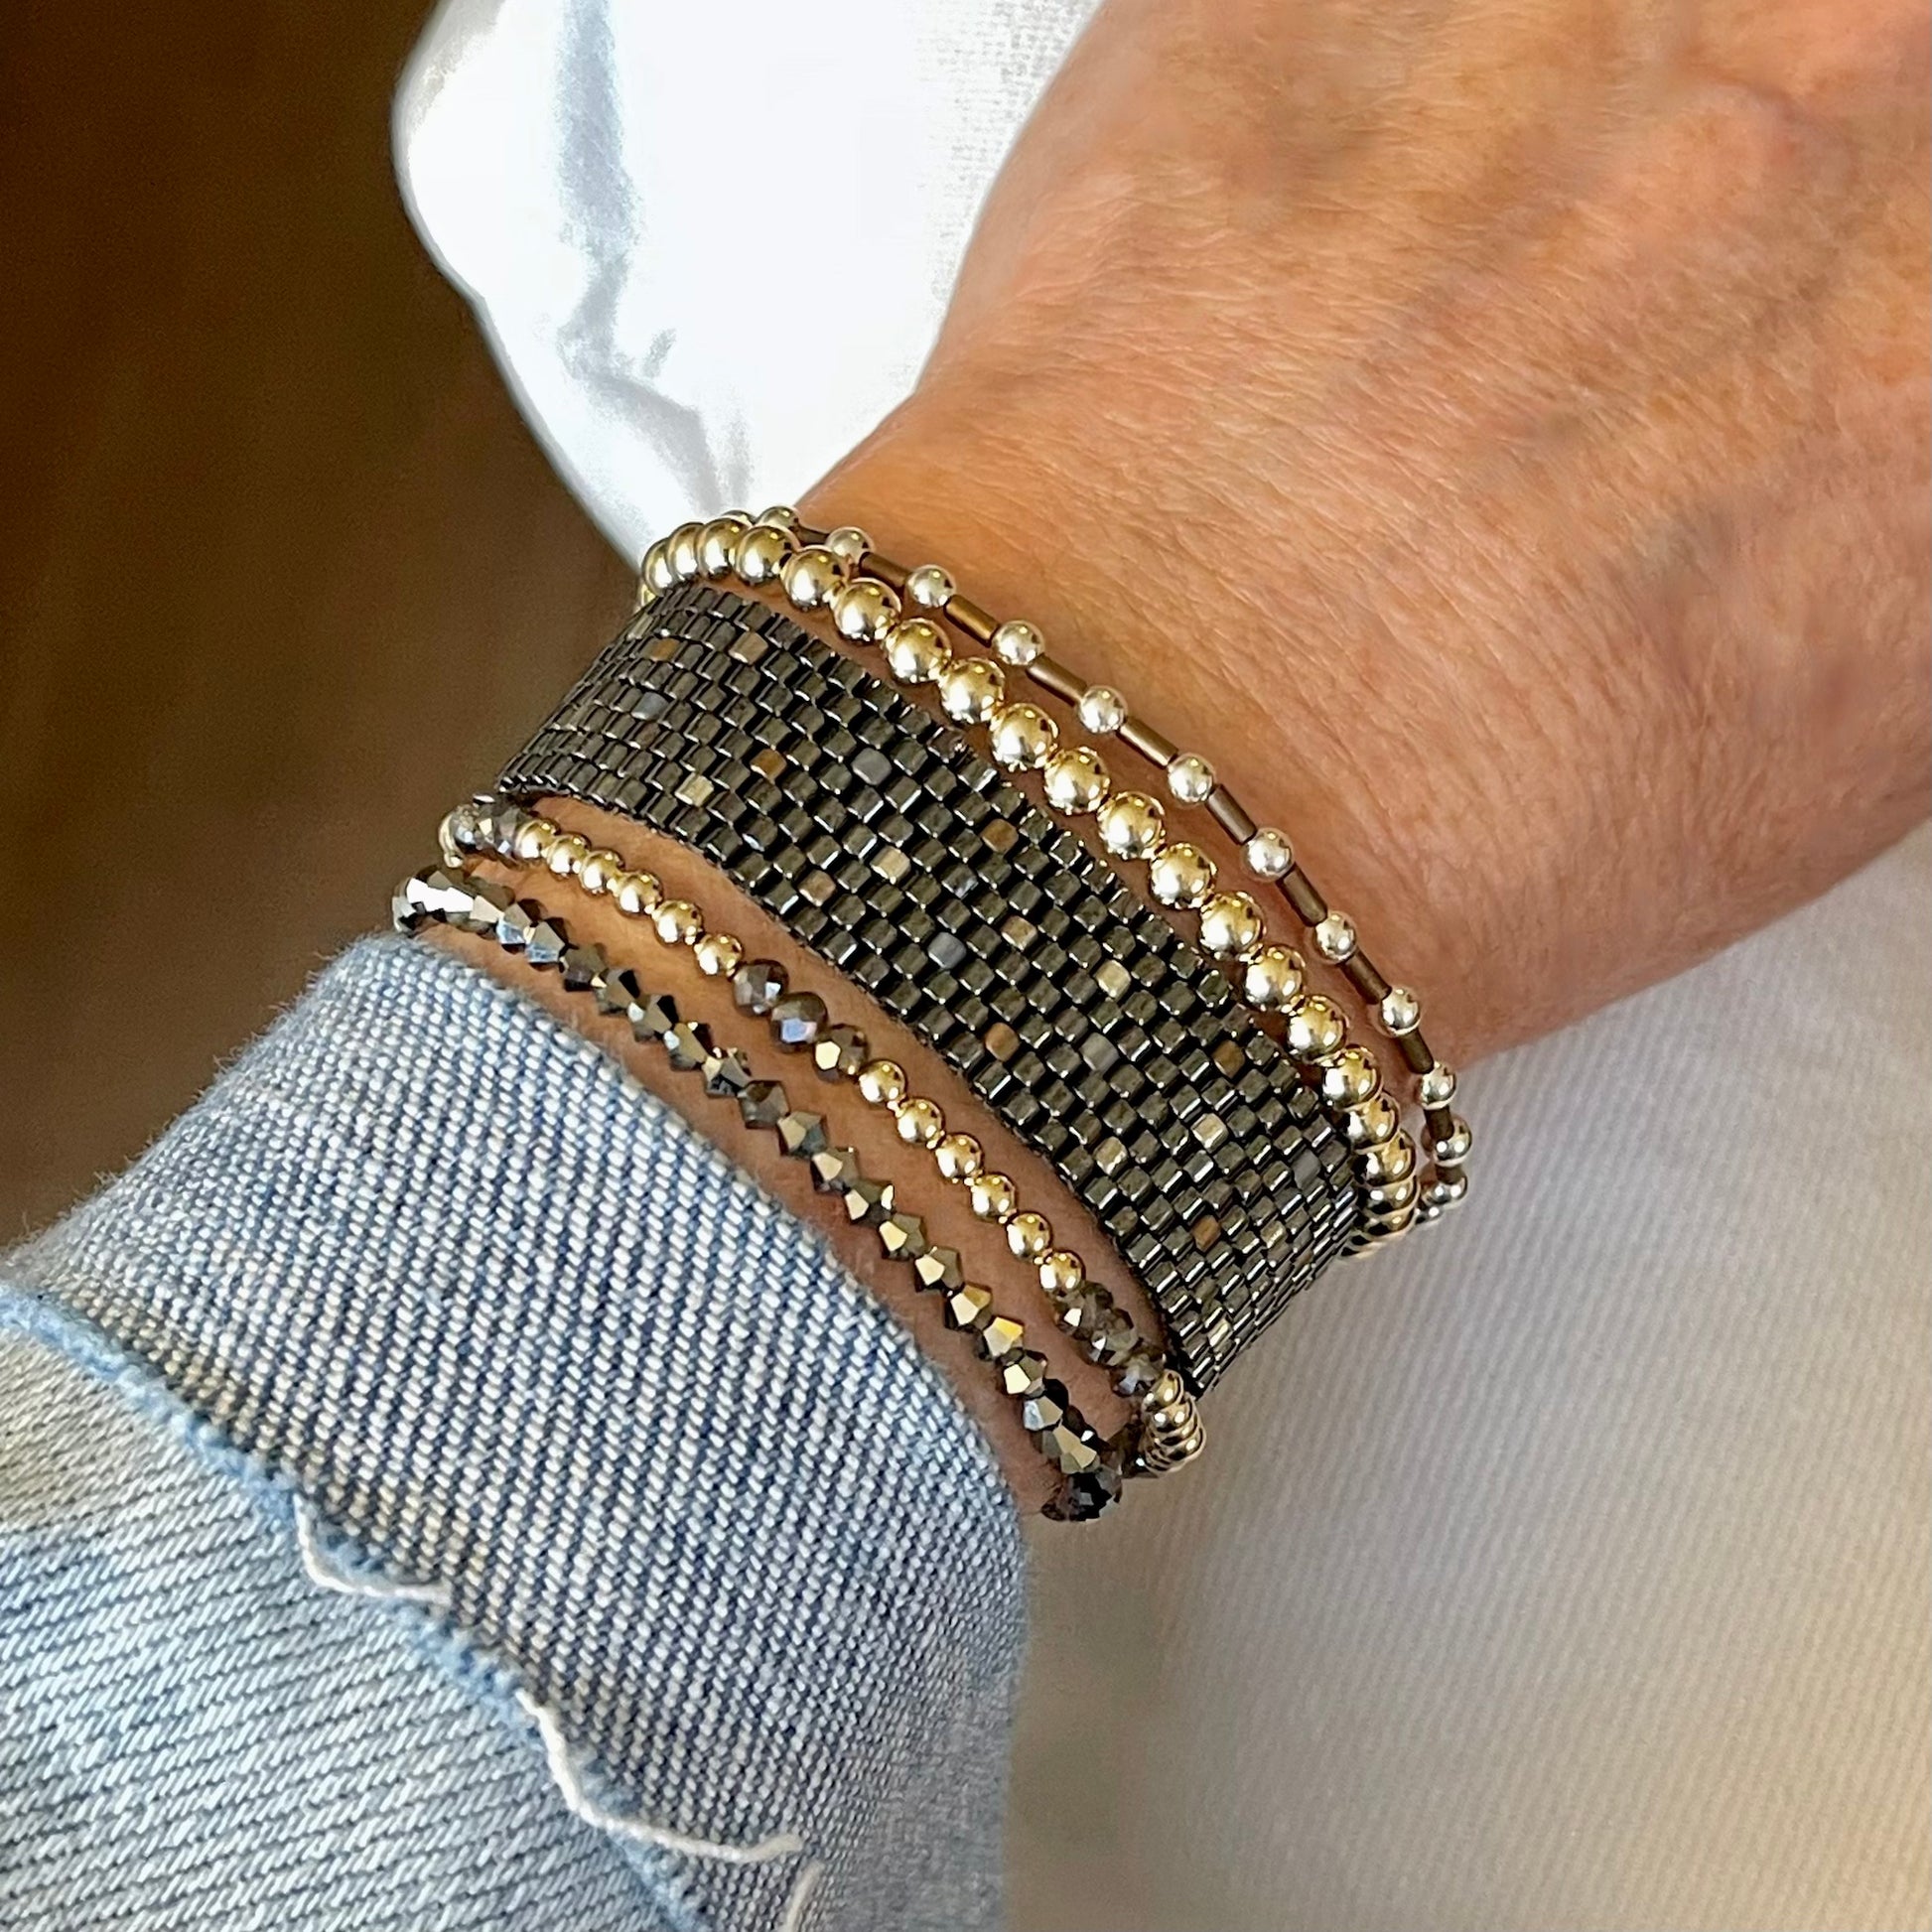 Mixed metal cuff and stretch bracelet stack with gunmetal, 14K gold fill, sterling silver, bronze and amber beads.